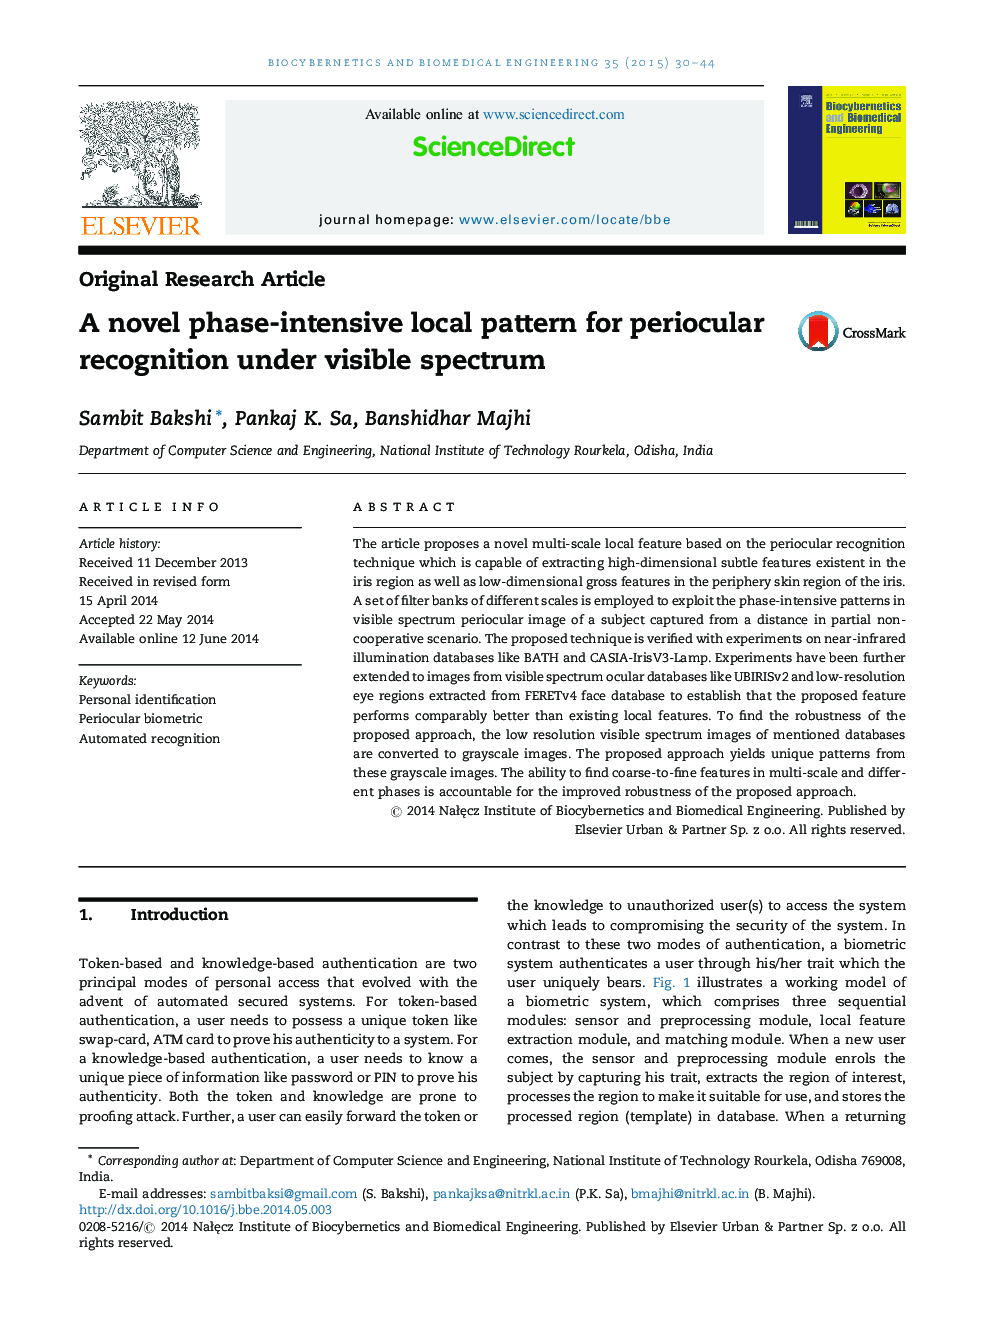 A novel phase-intensive local pattern for periocular recognition under visible spectrum